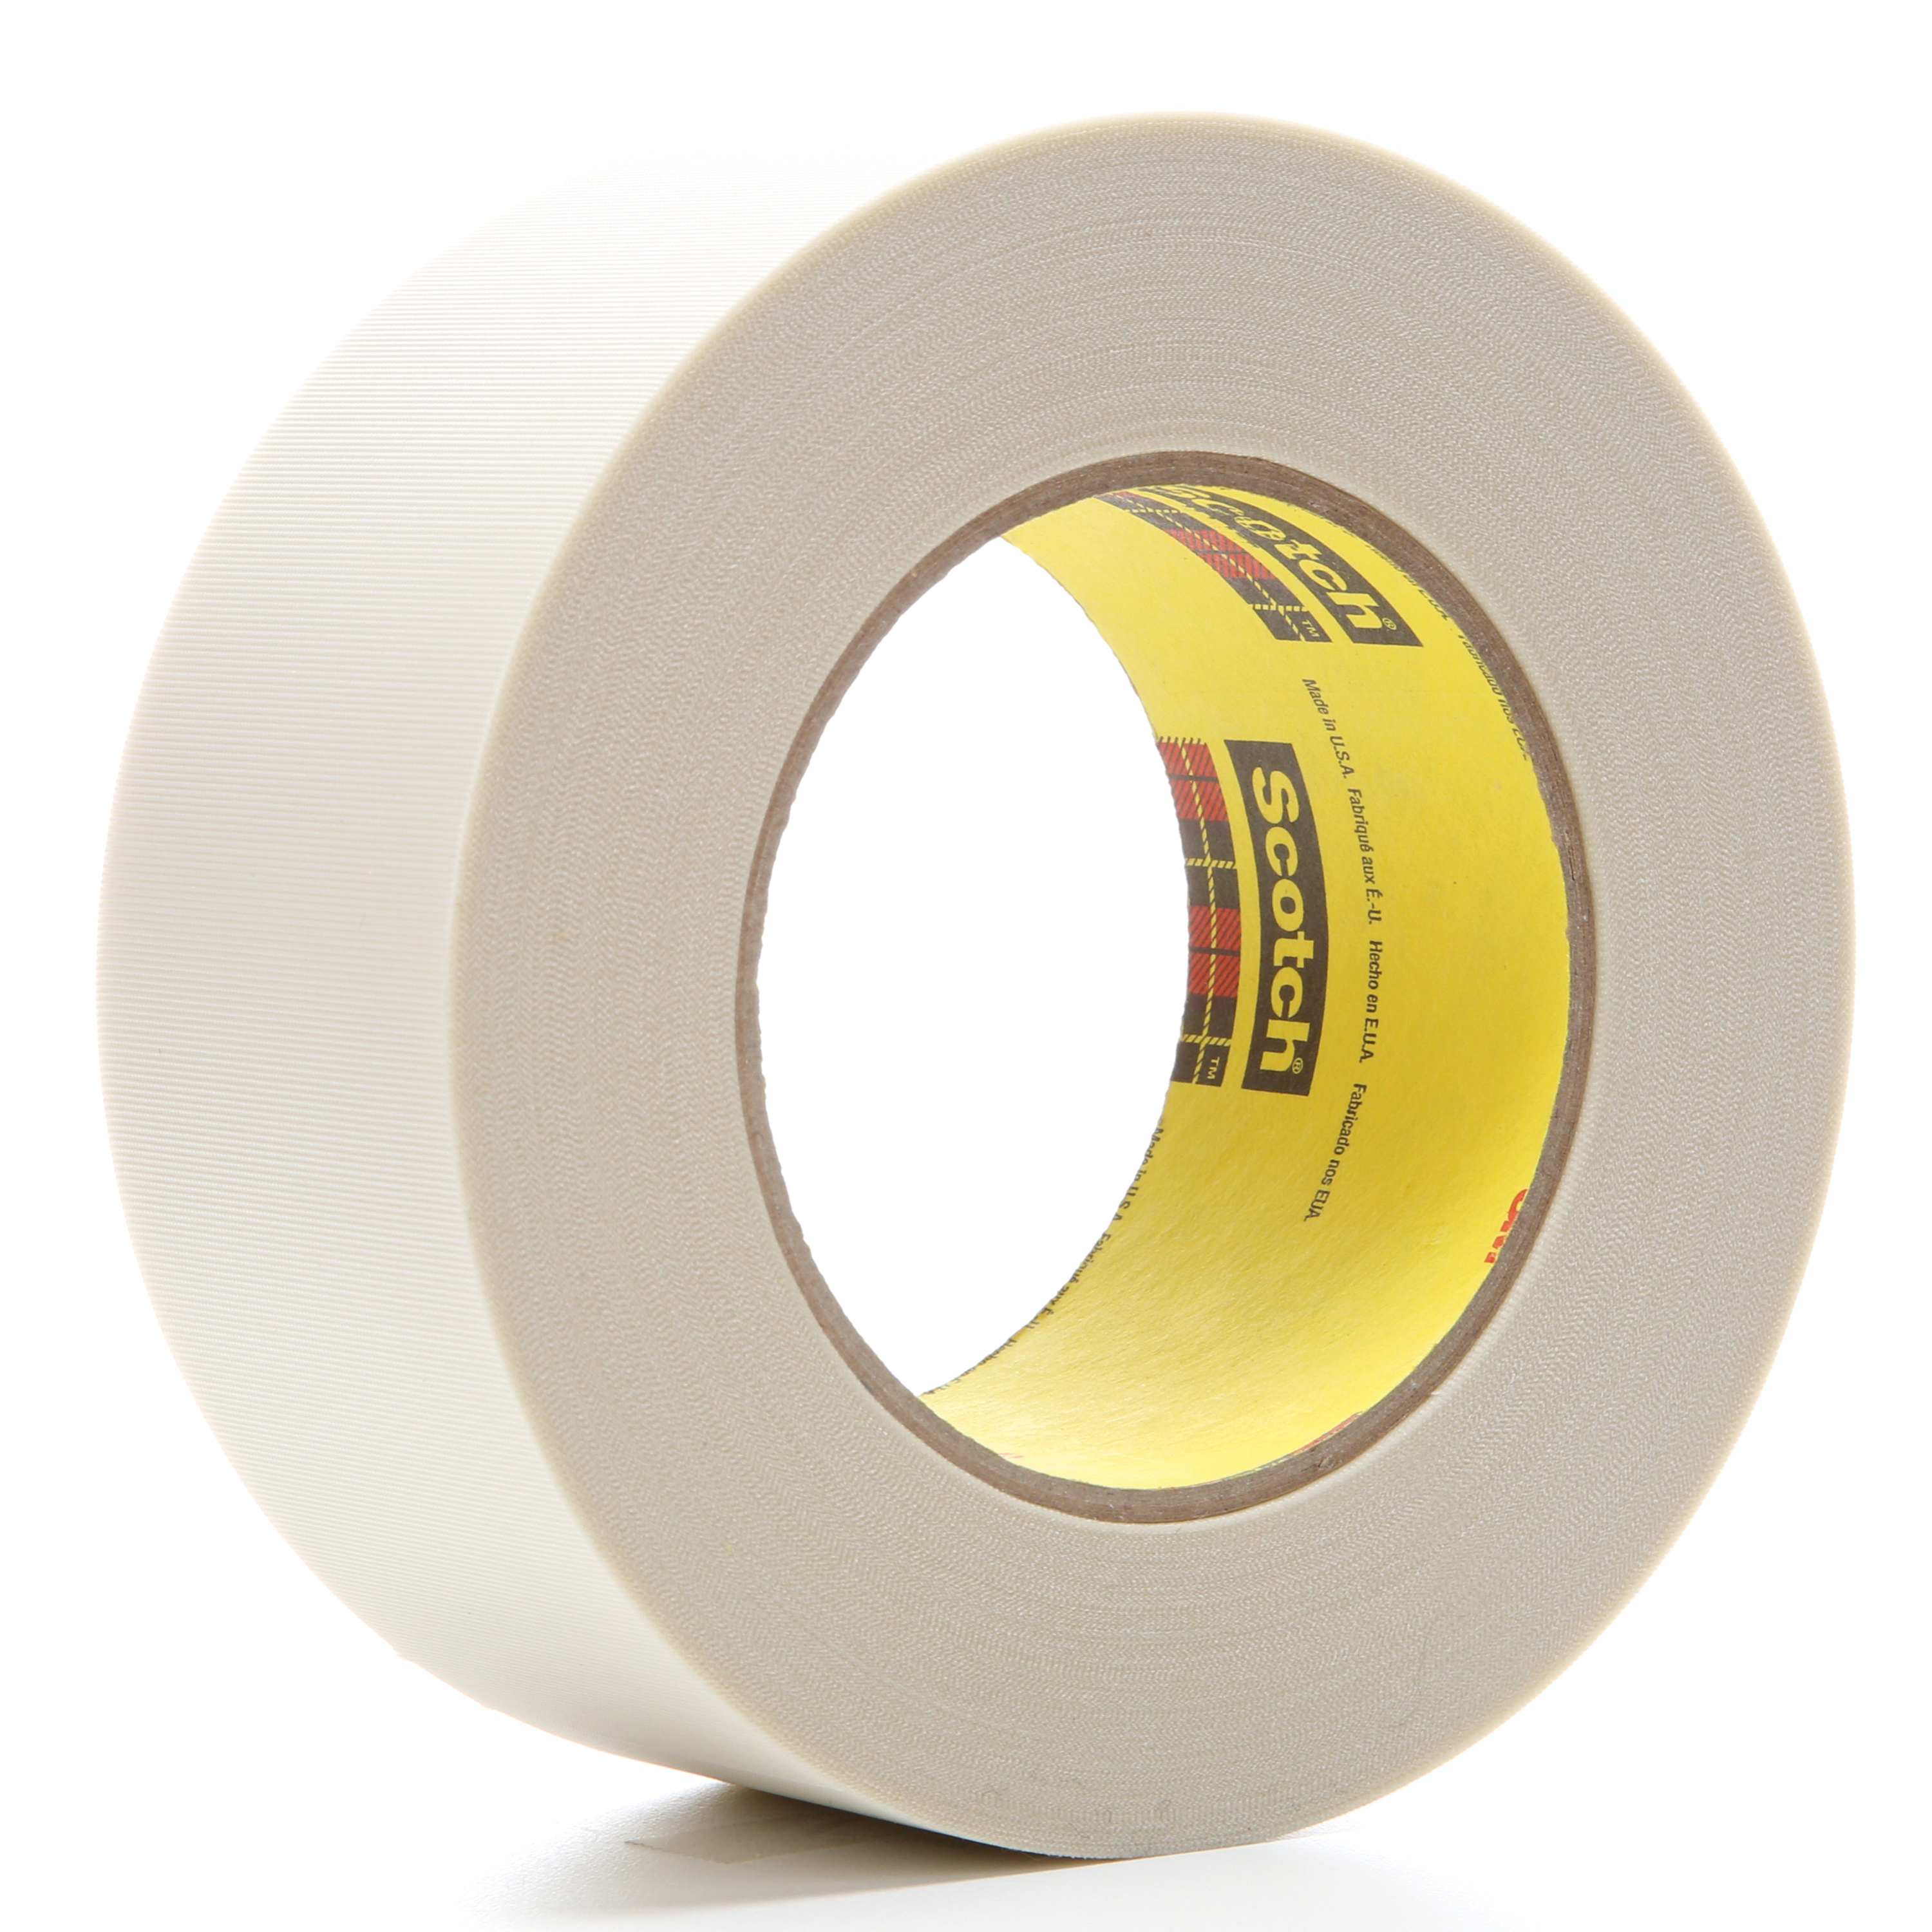 3M™ 021200-04275 Cloth Tape, 60 yd L x 2 in W, 6.4 mil THK, Silicon Adhesive, Glass Cloth Backing, White